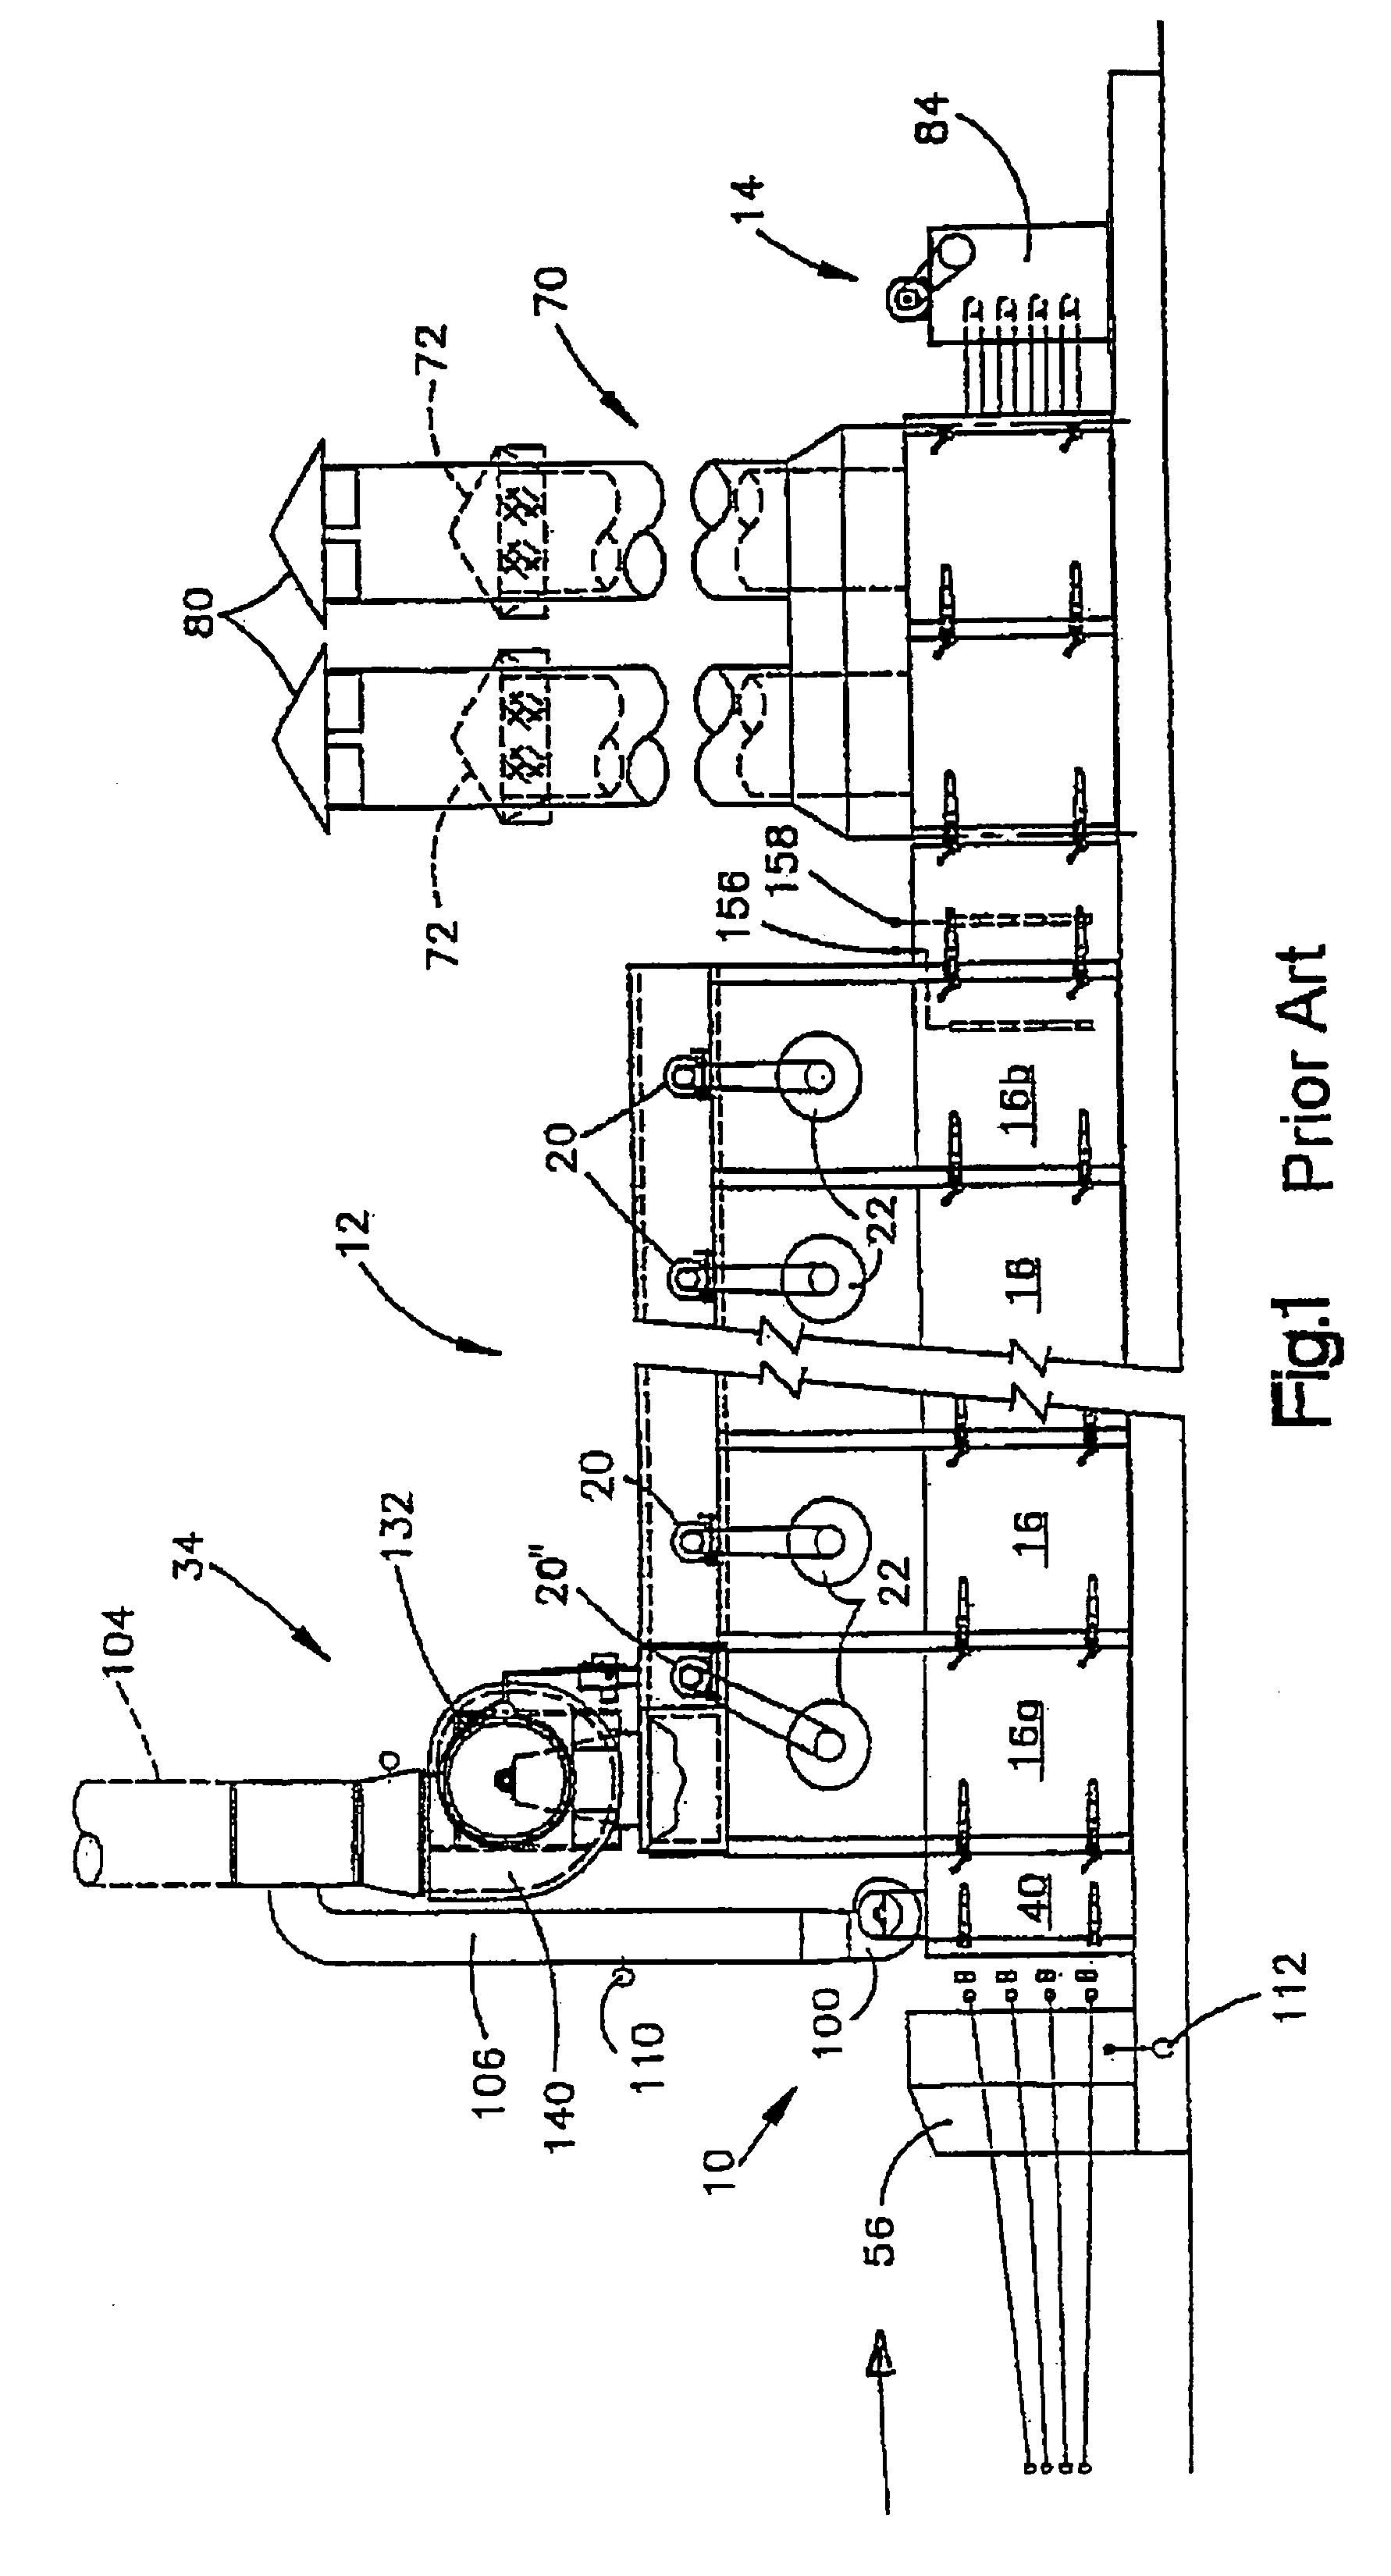 Method and apparatus for inhibiting pitch formation in the wet seal exhaust duct of a veneer dryer